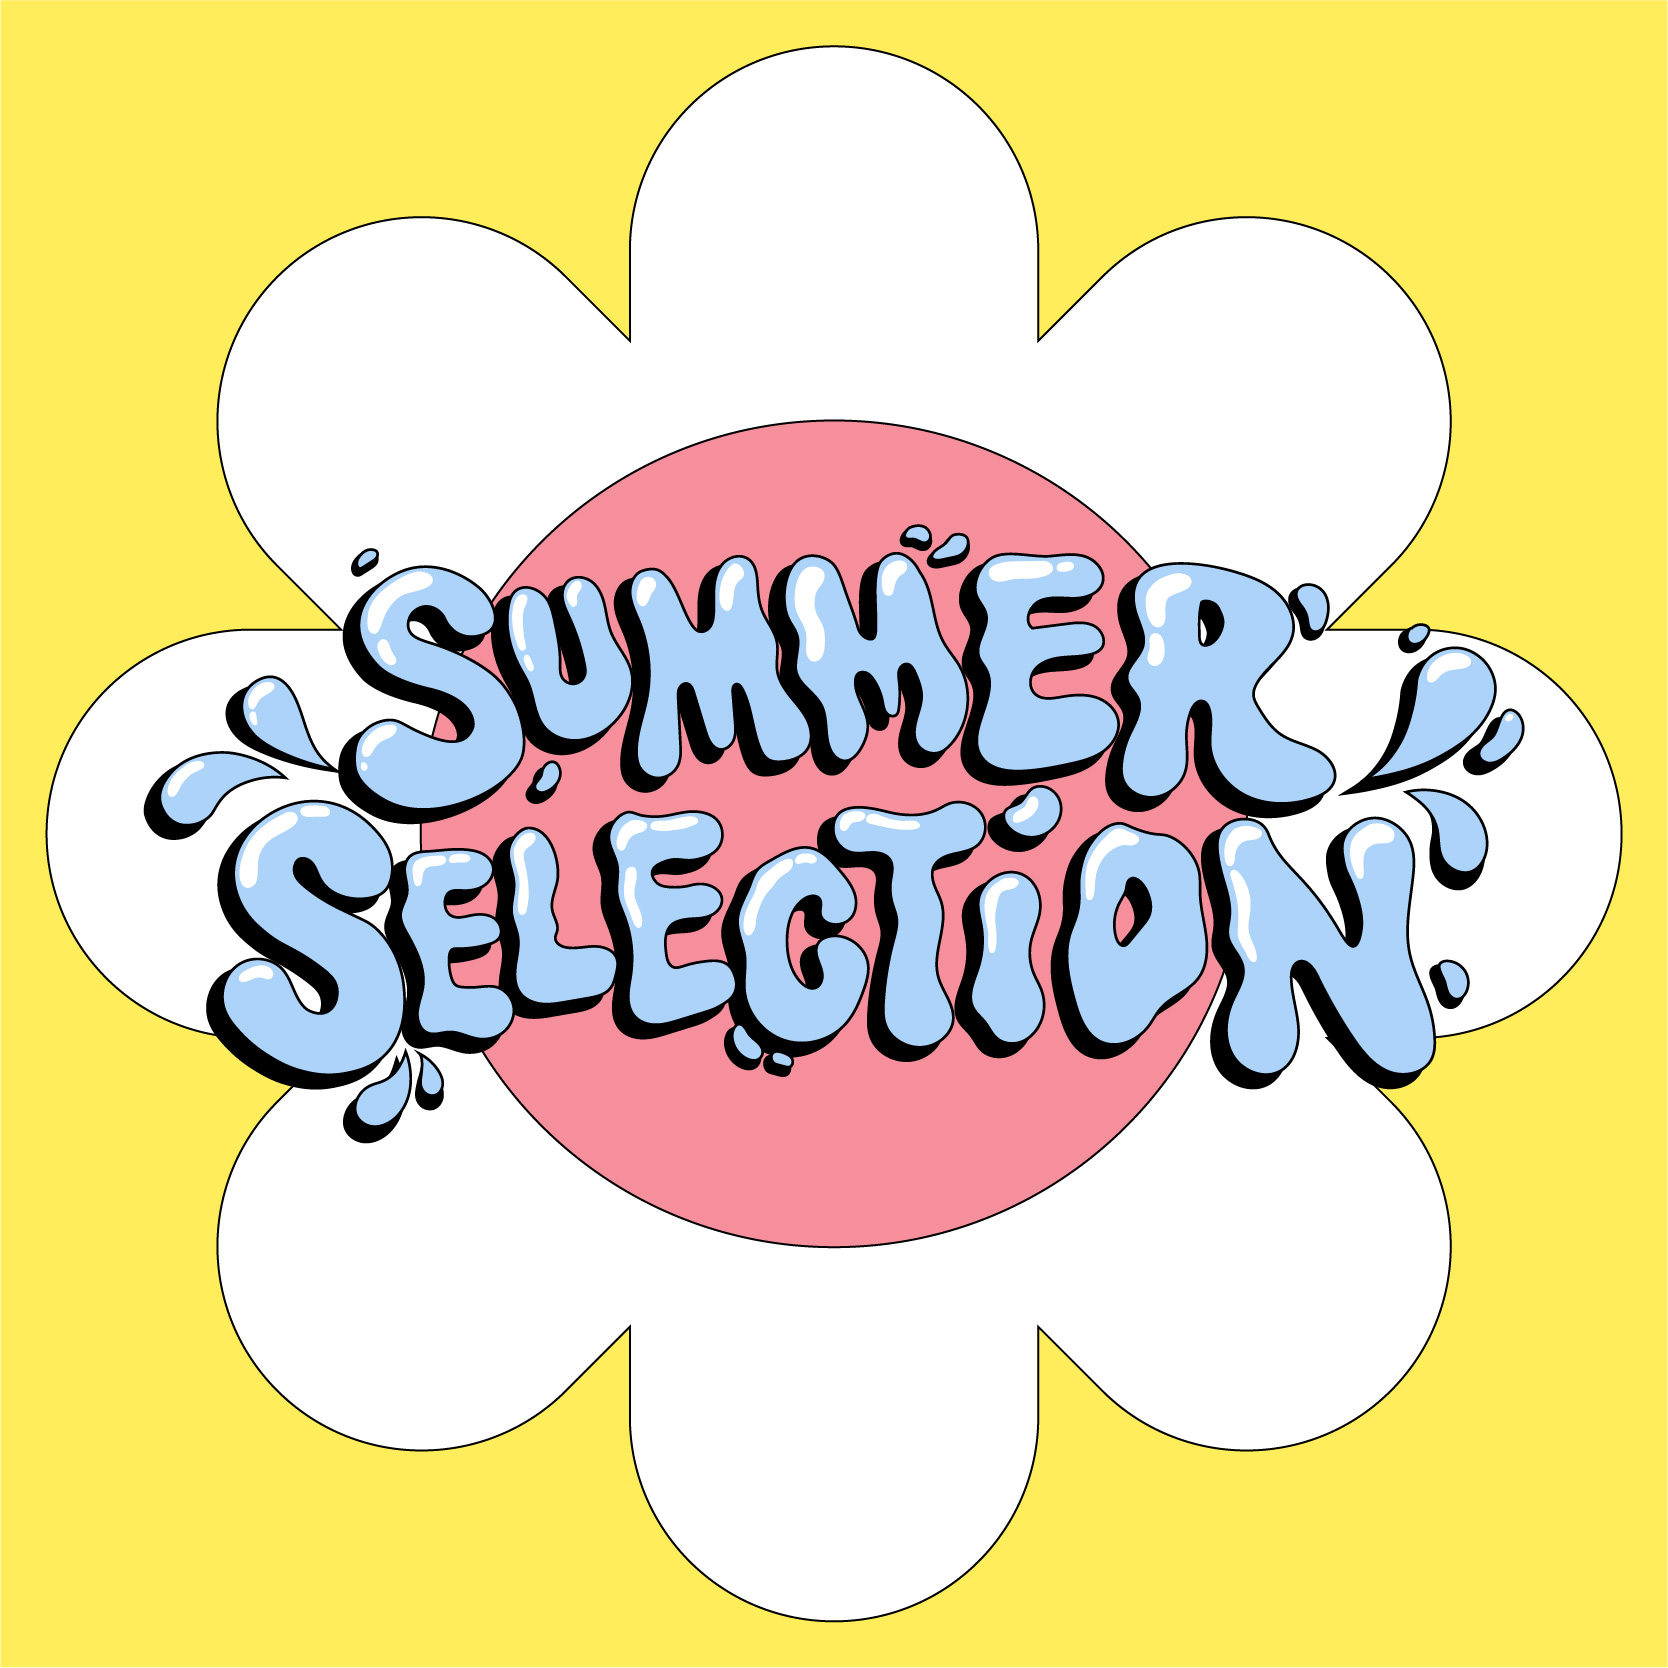 Hatchie Interview on Summer Selection - 15/1/23